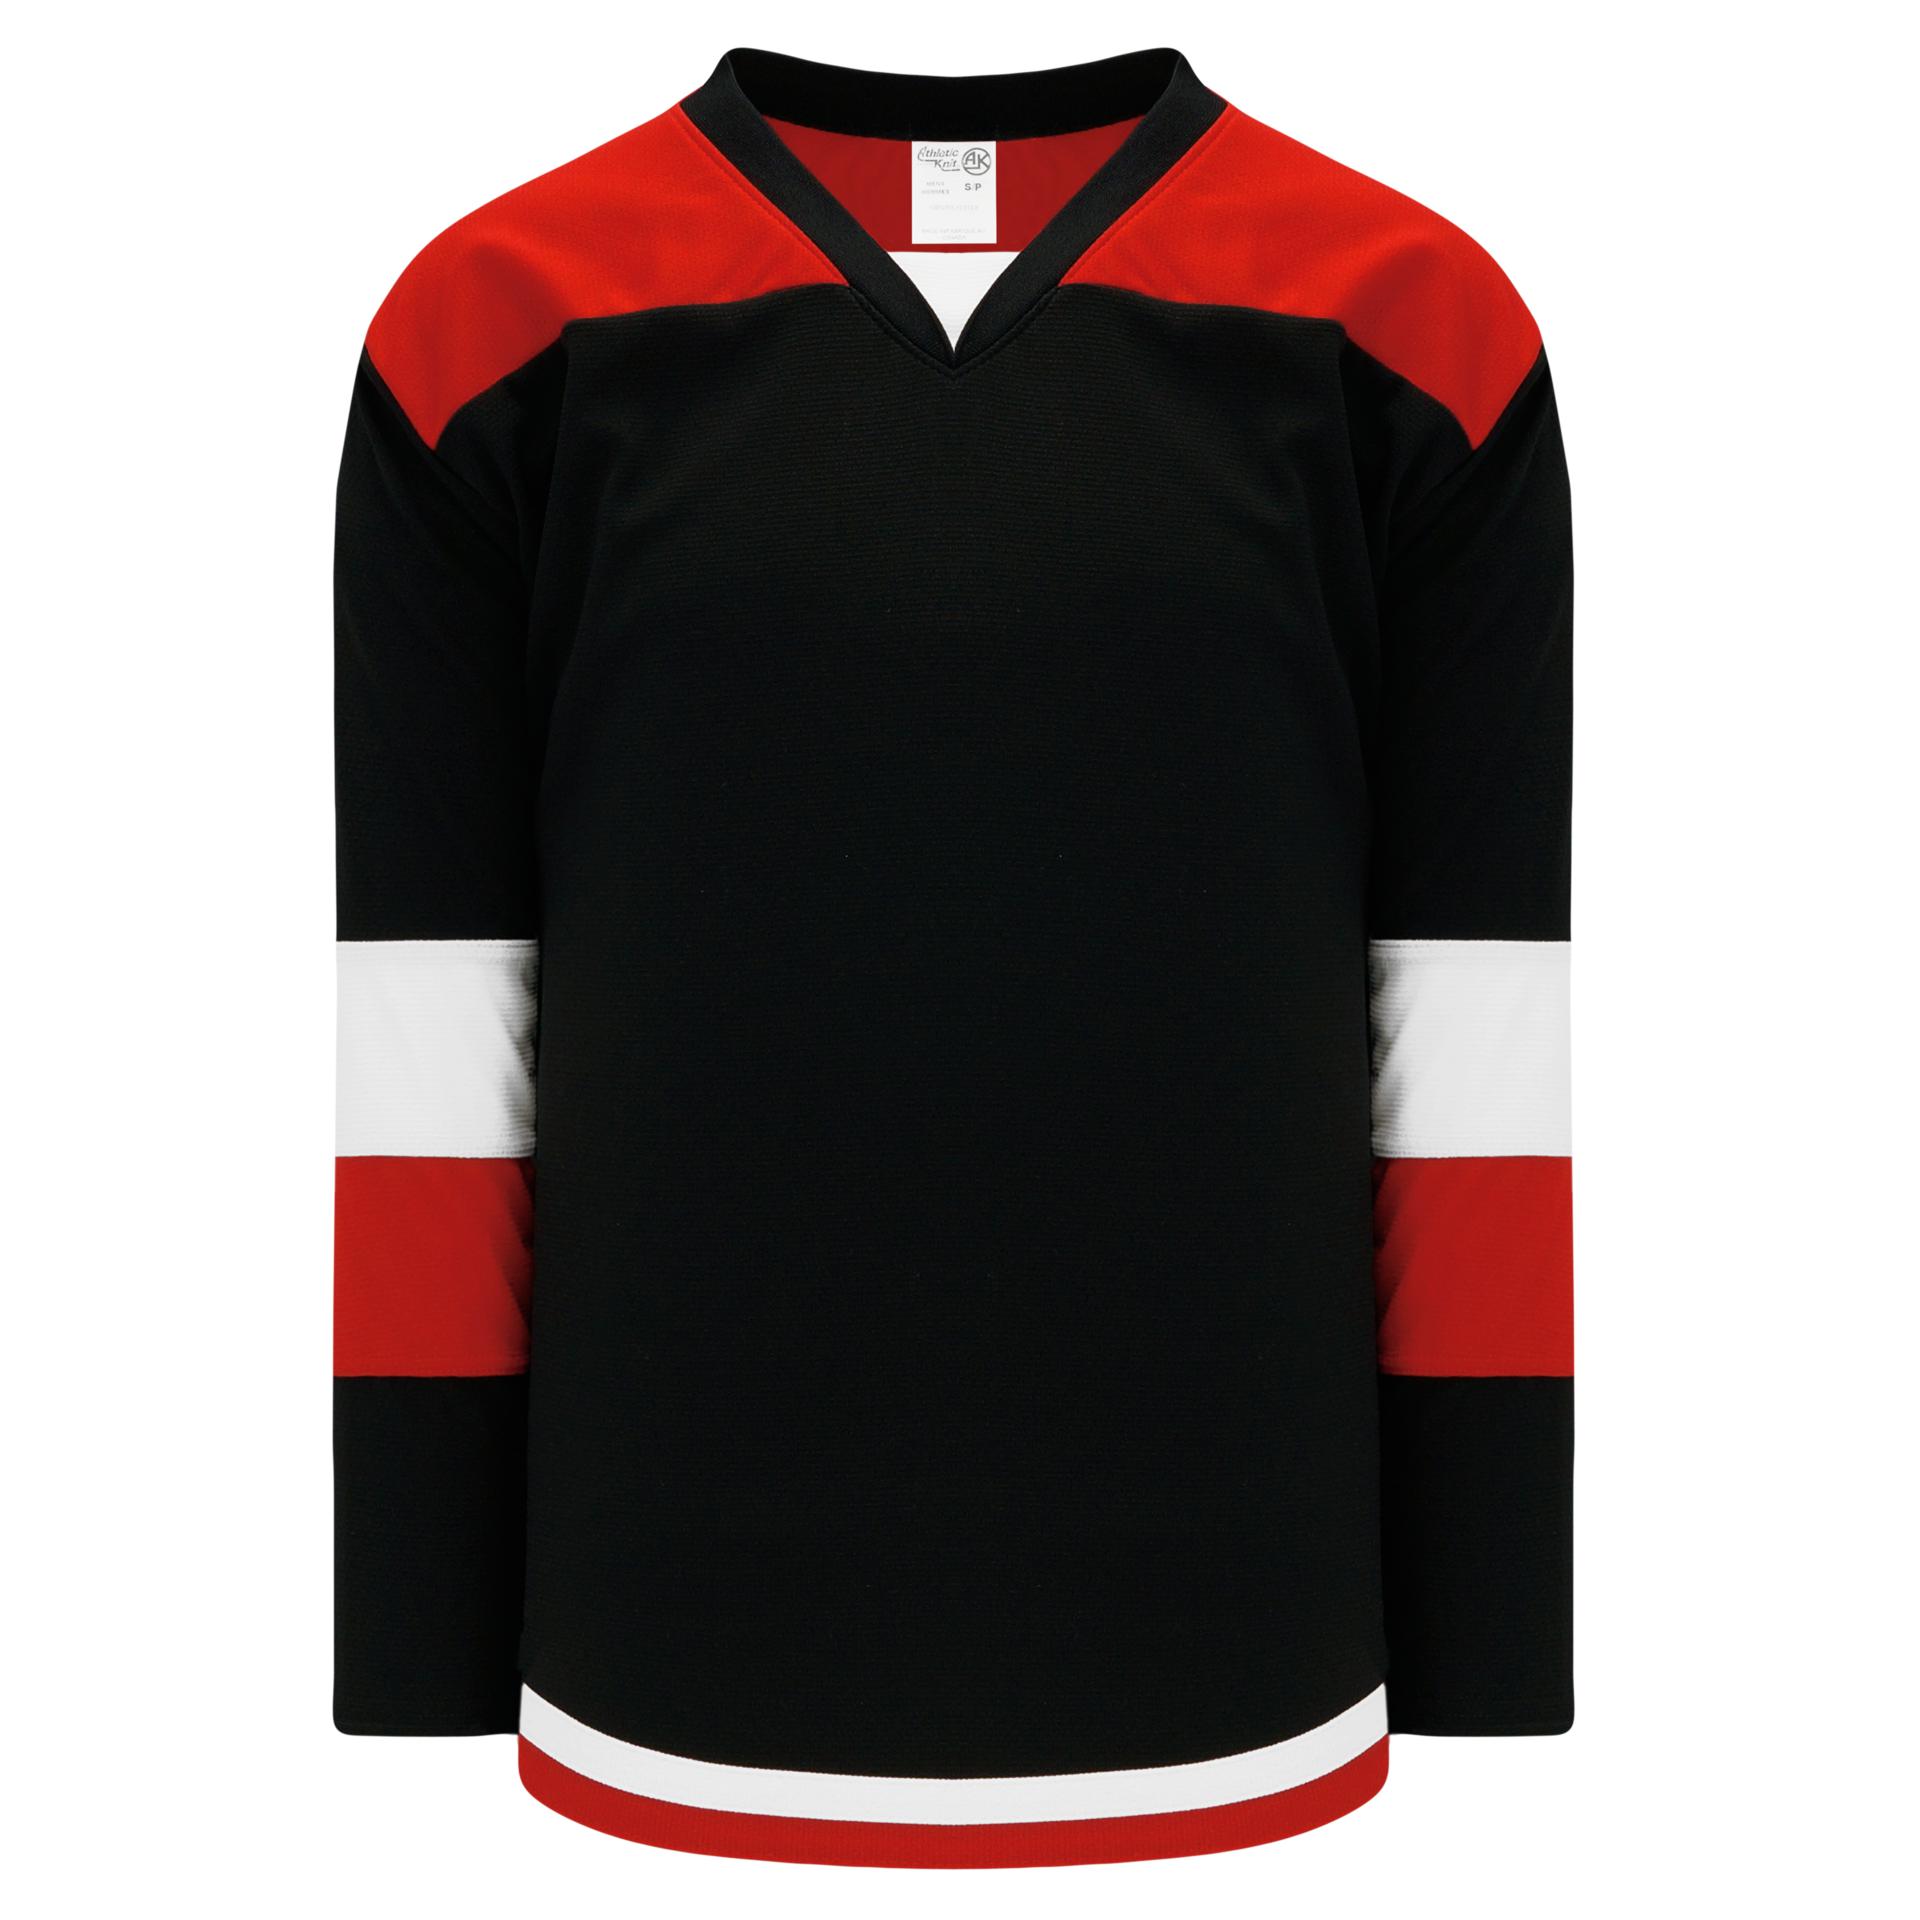 jersey red and black